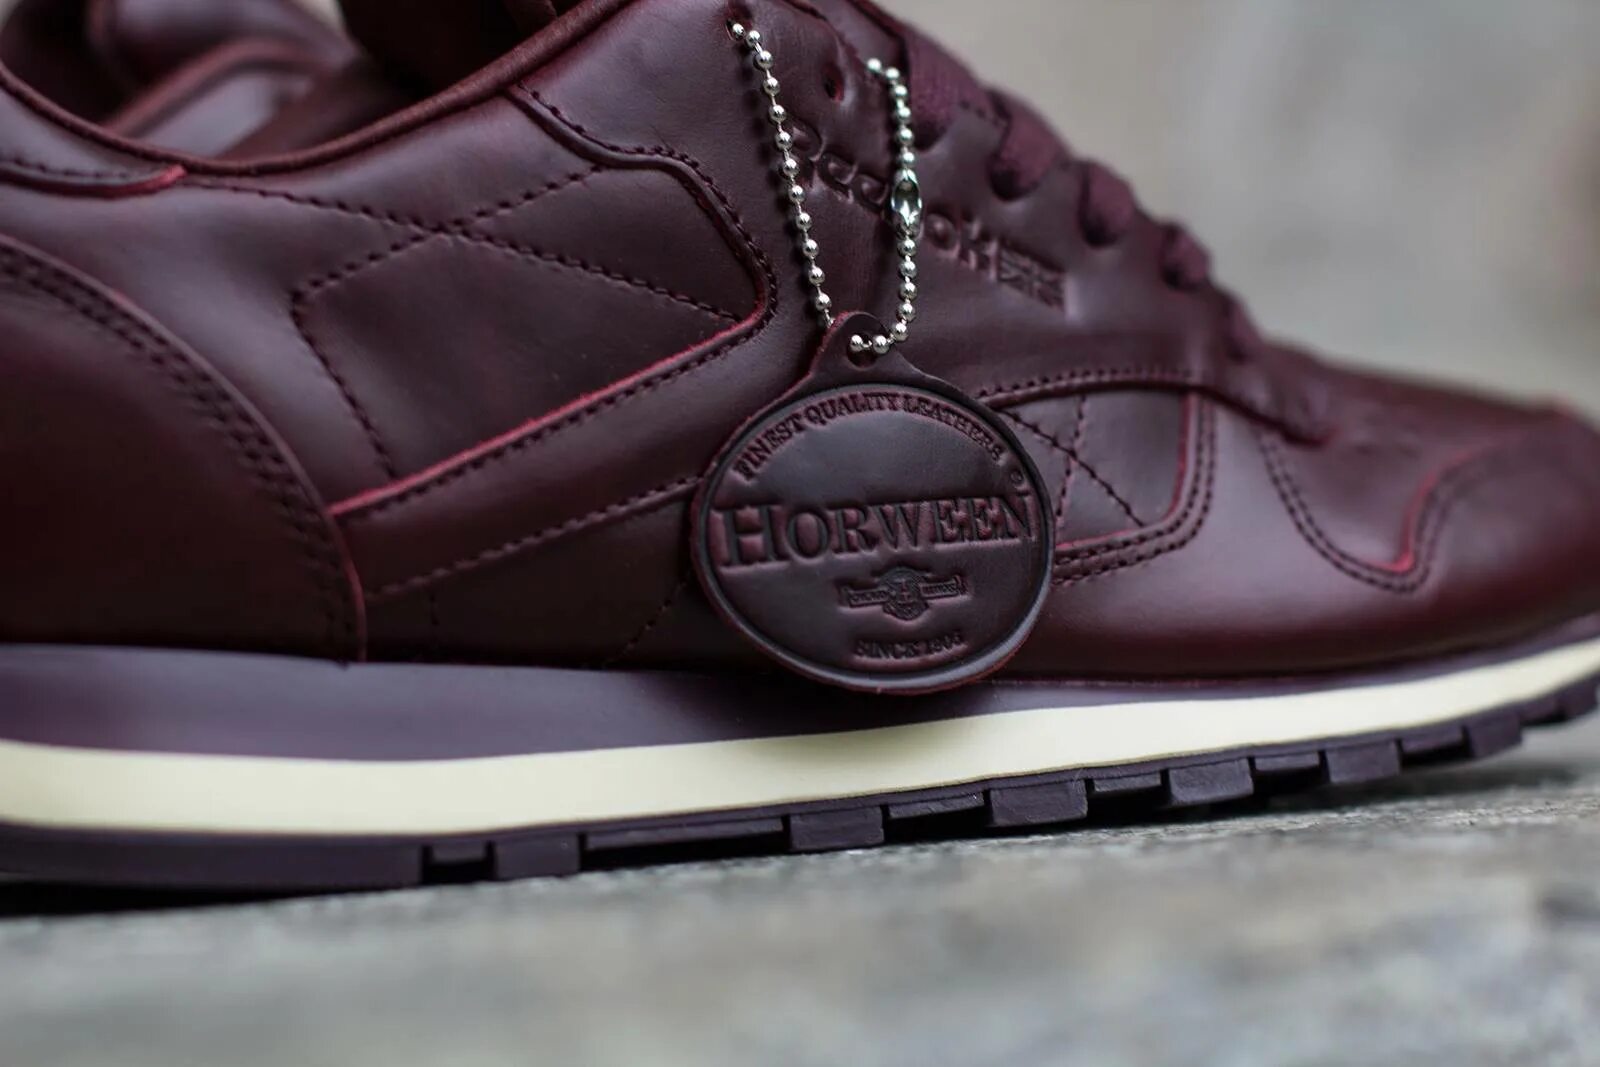 Reebok Classic Horween. Reebok Classic Leather Horween. Reebok Horween Burgundy. Reebok Classic Leather Lux.